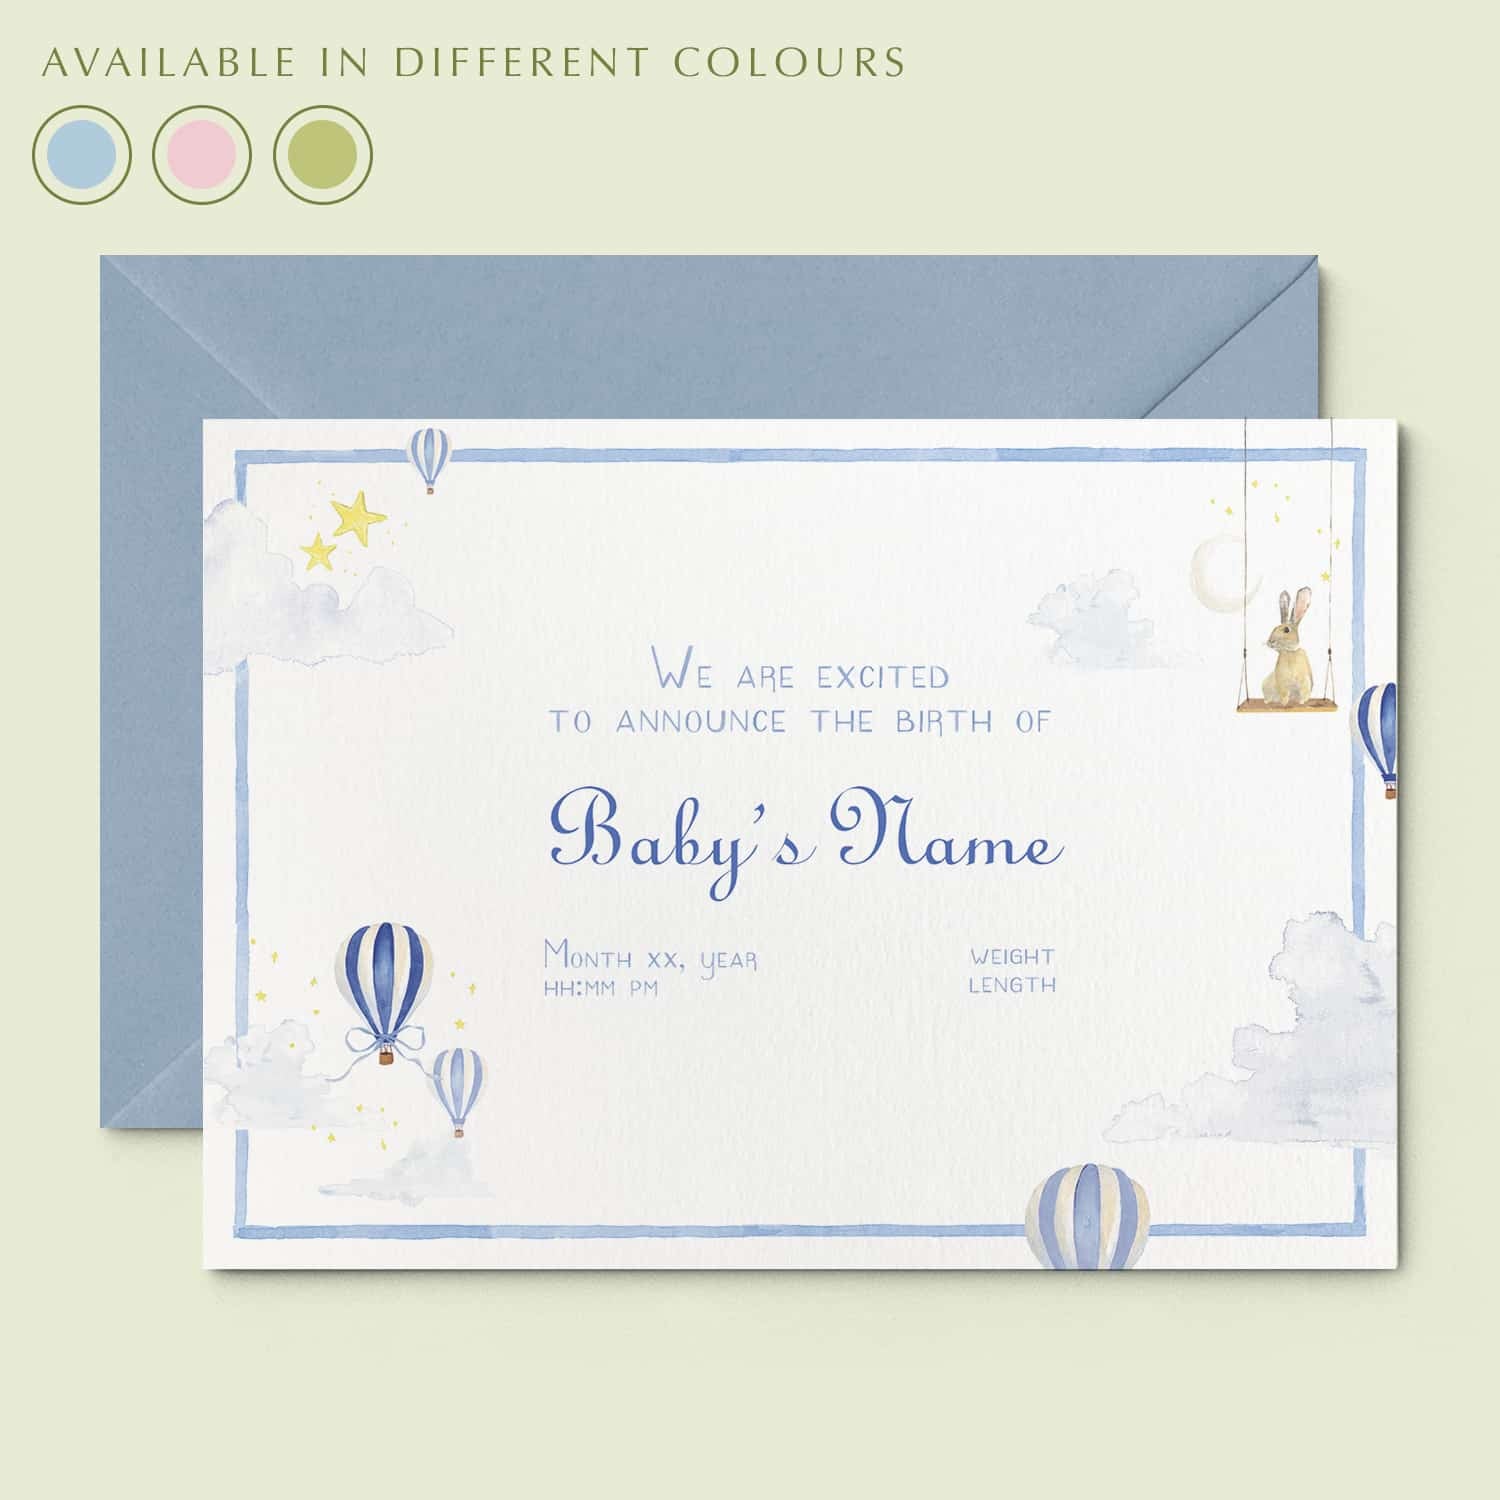 Hot Air Balloons Printed Birth Announcements - Without Photo - 01